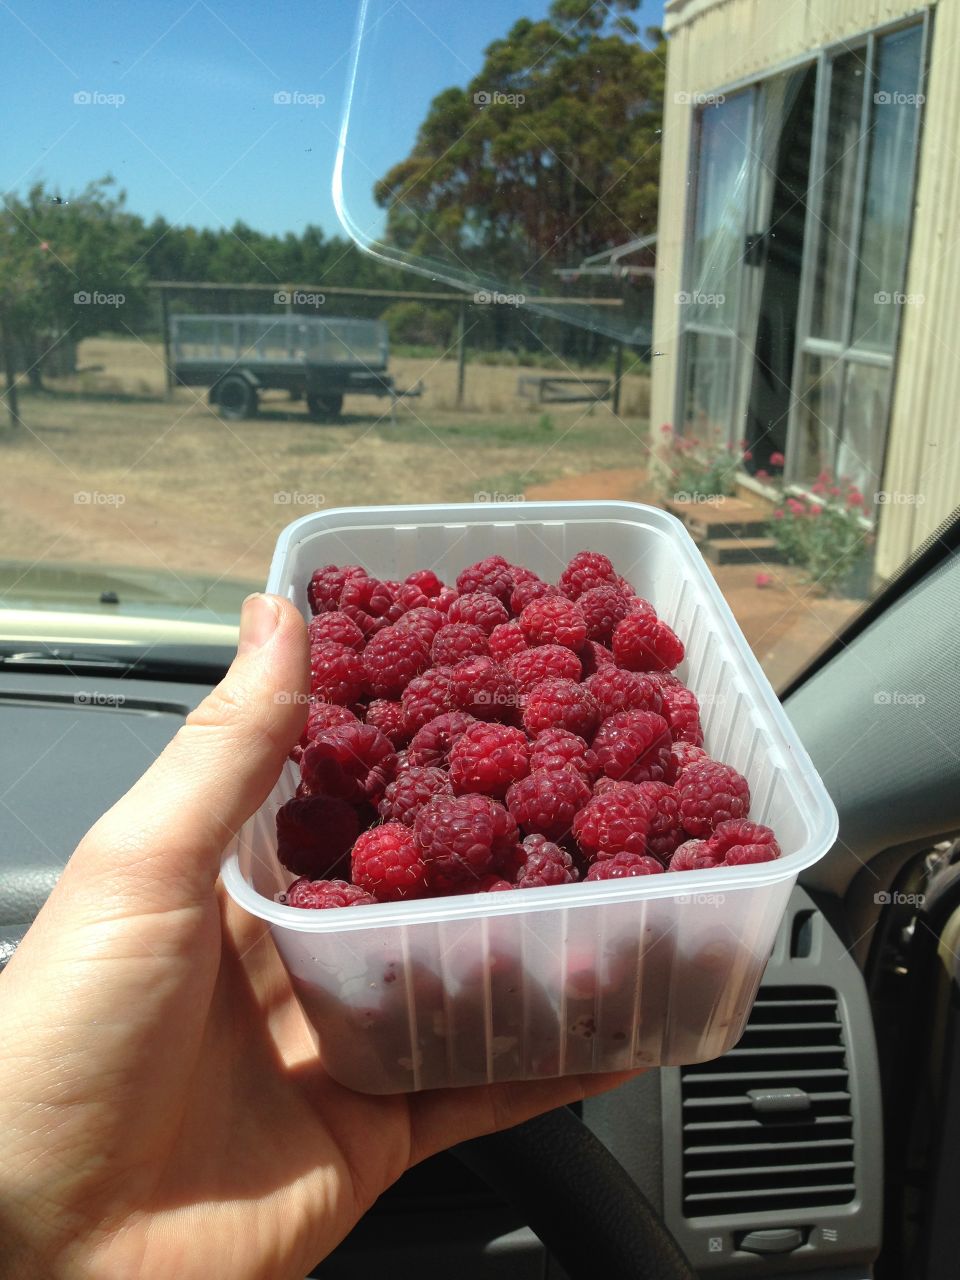 Fresh raspberries from farm produce food stall stand on road side